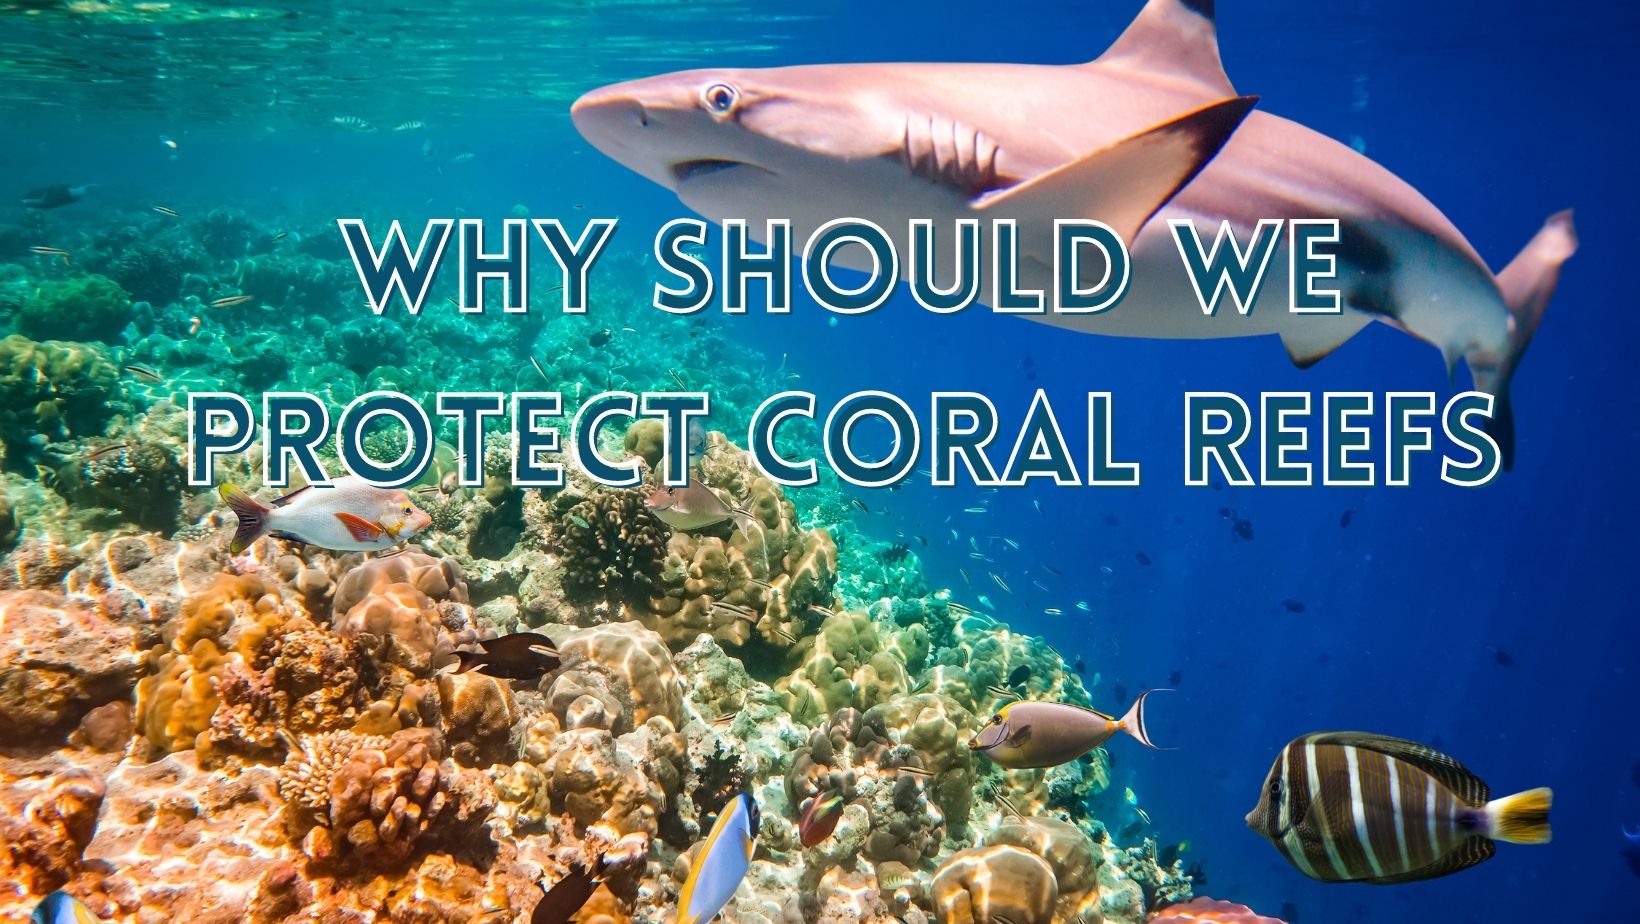 Why should we protect coral reefs